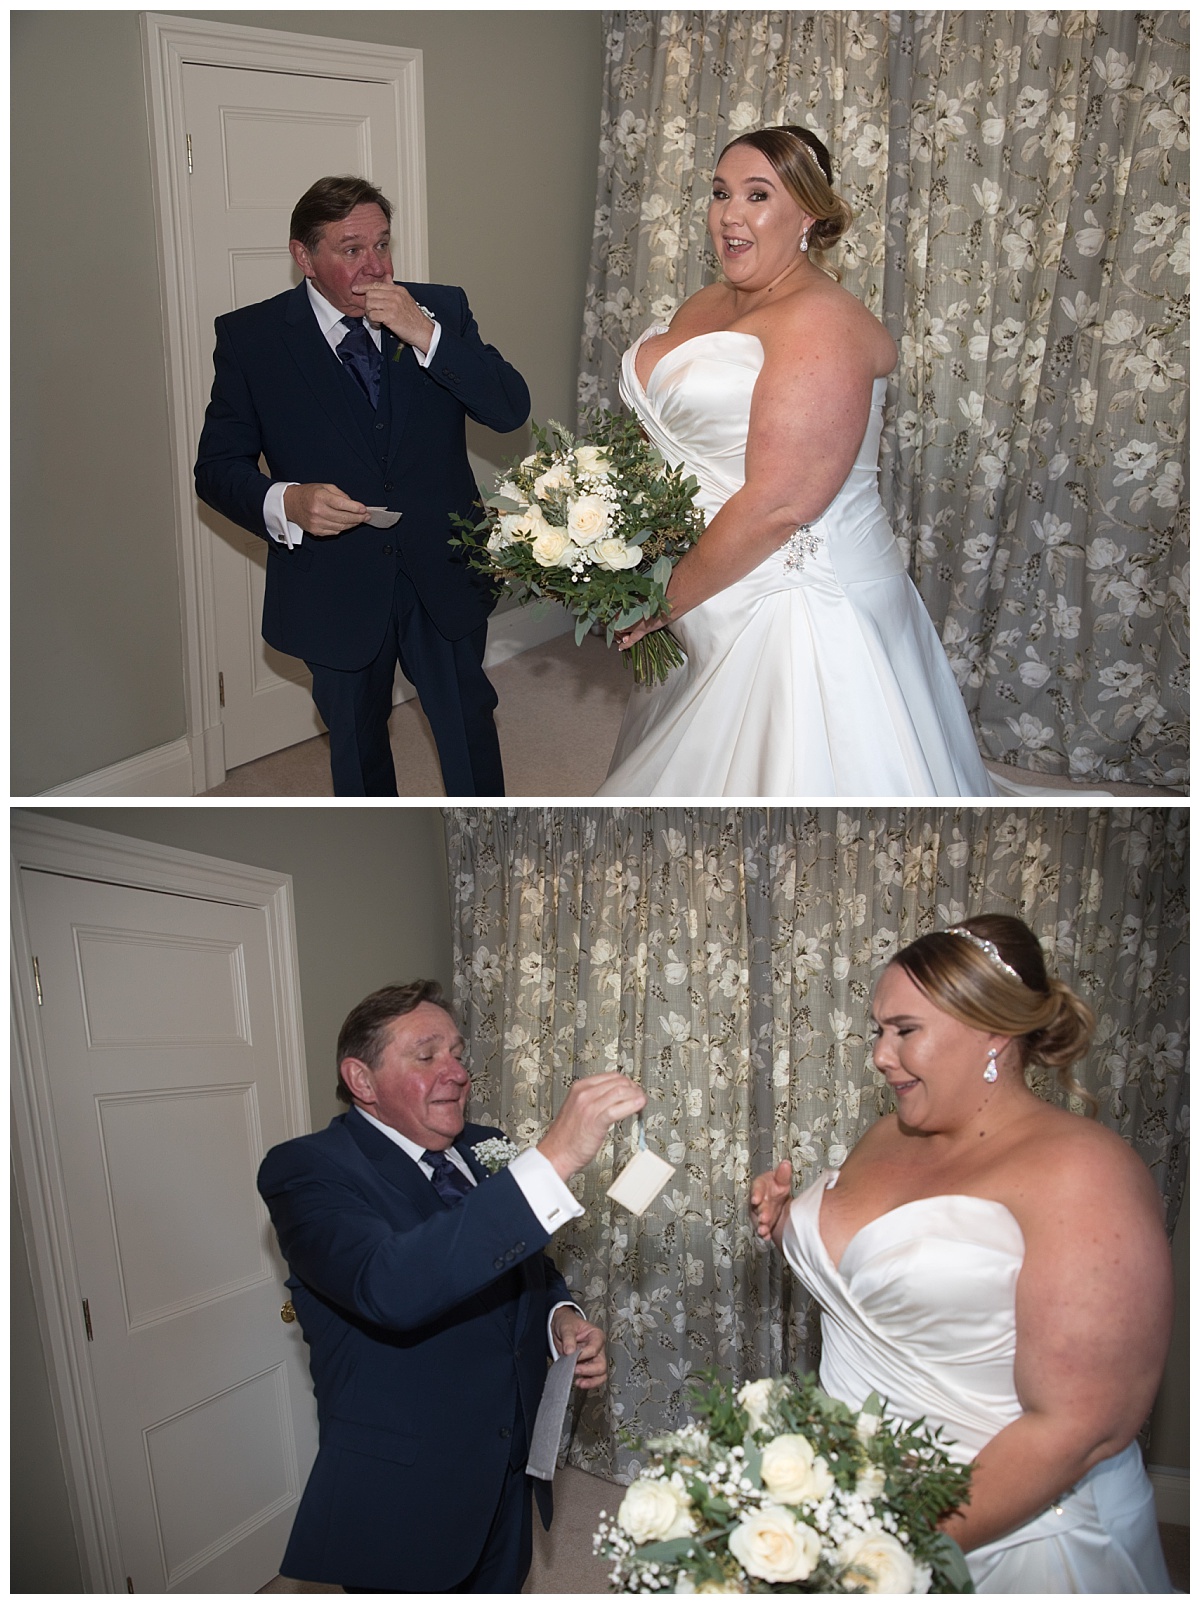 Wedding Photography Manchester - Lorna and Vinny's Abbeywood Estate and Gardens Wedding 35